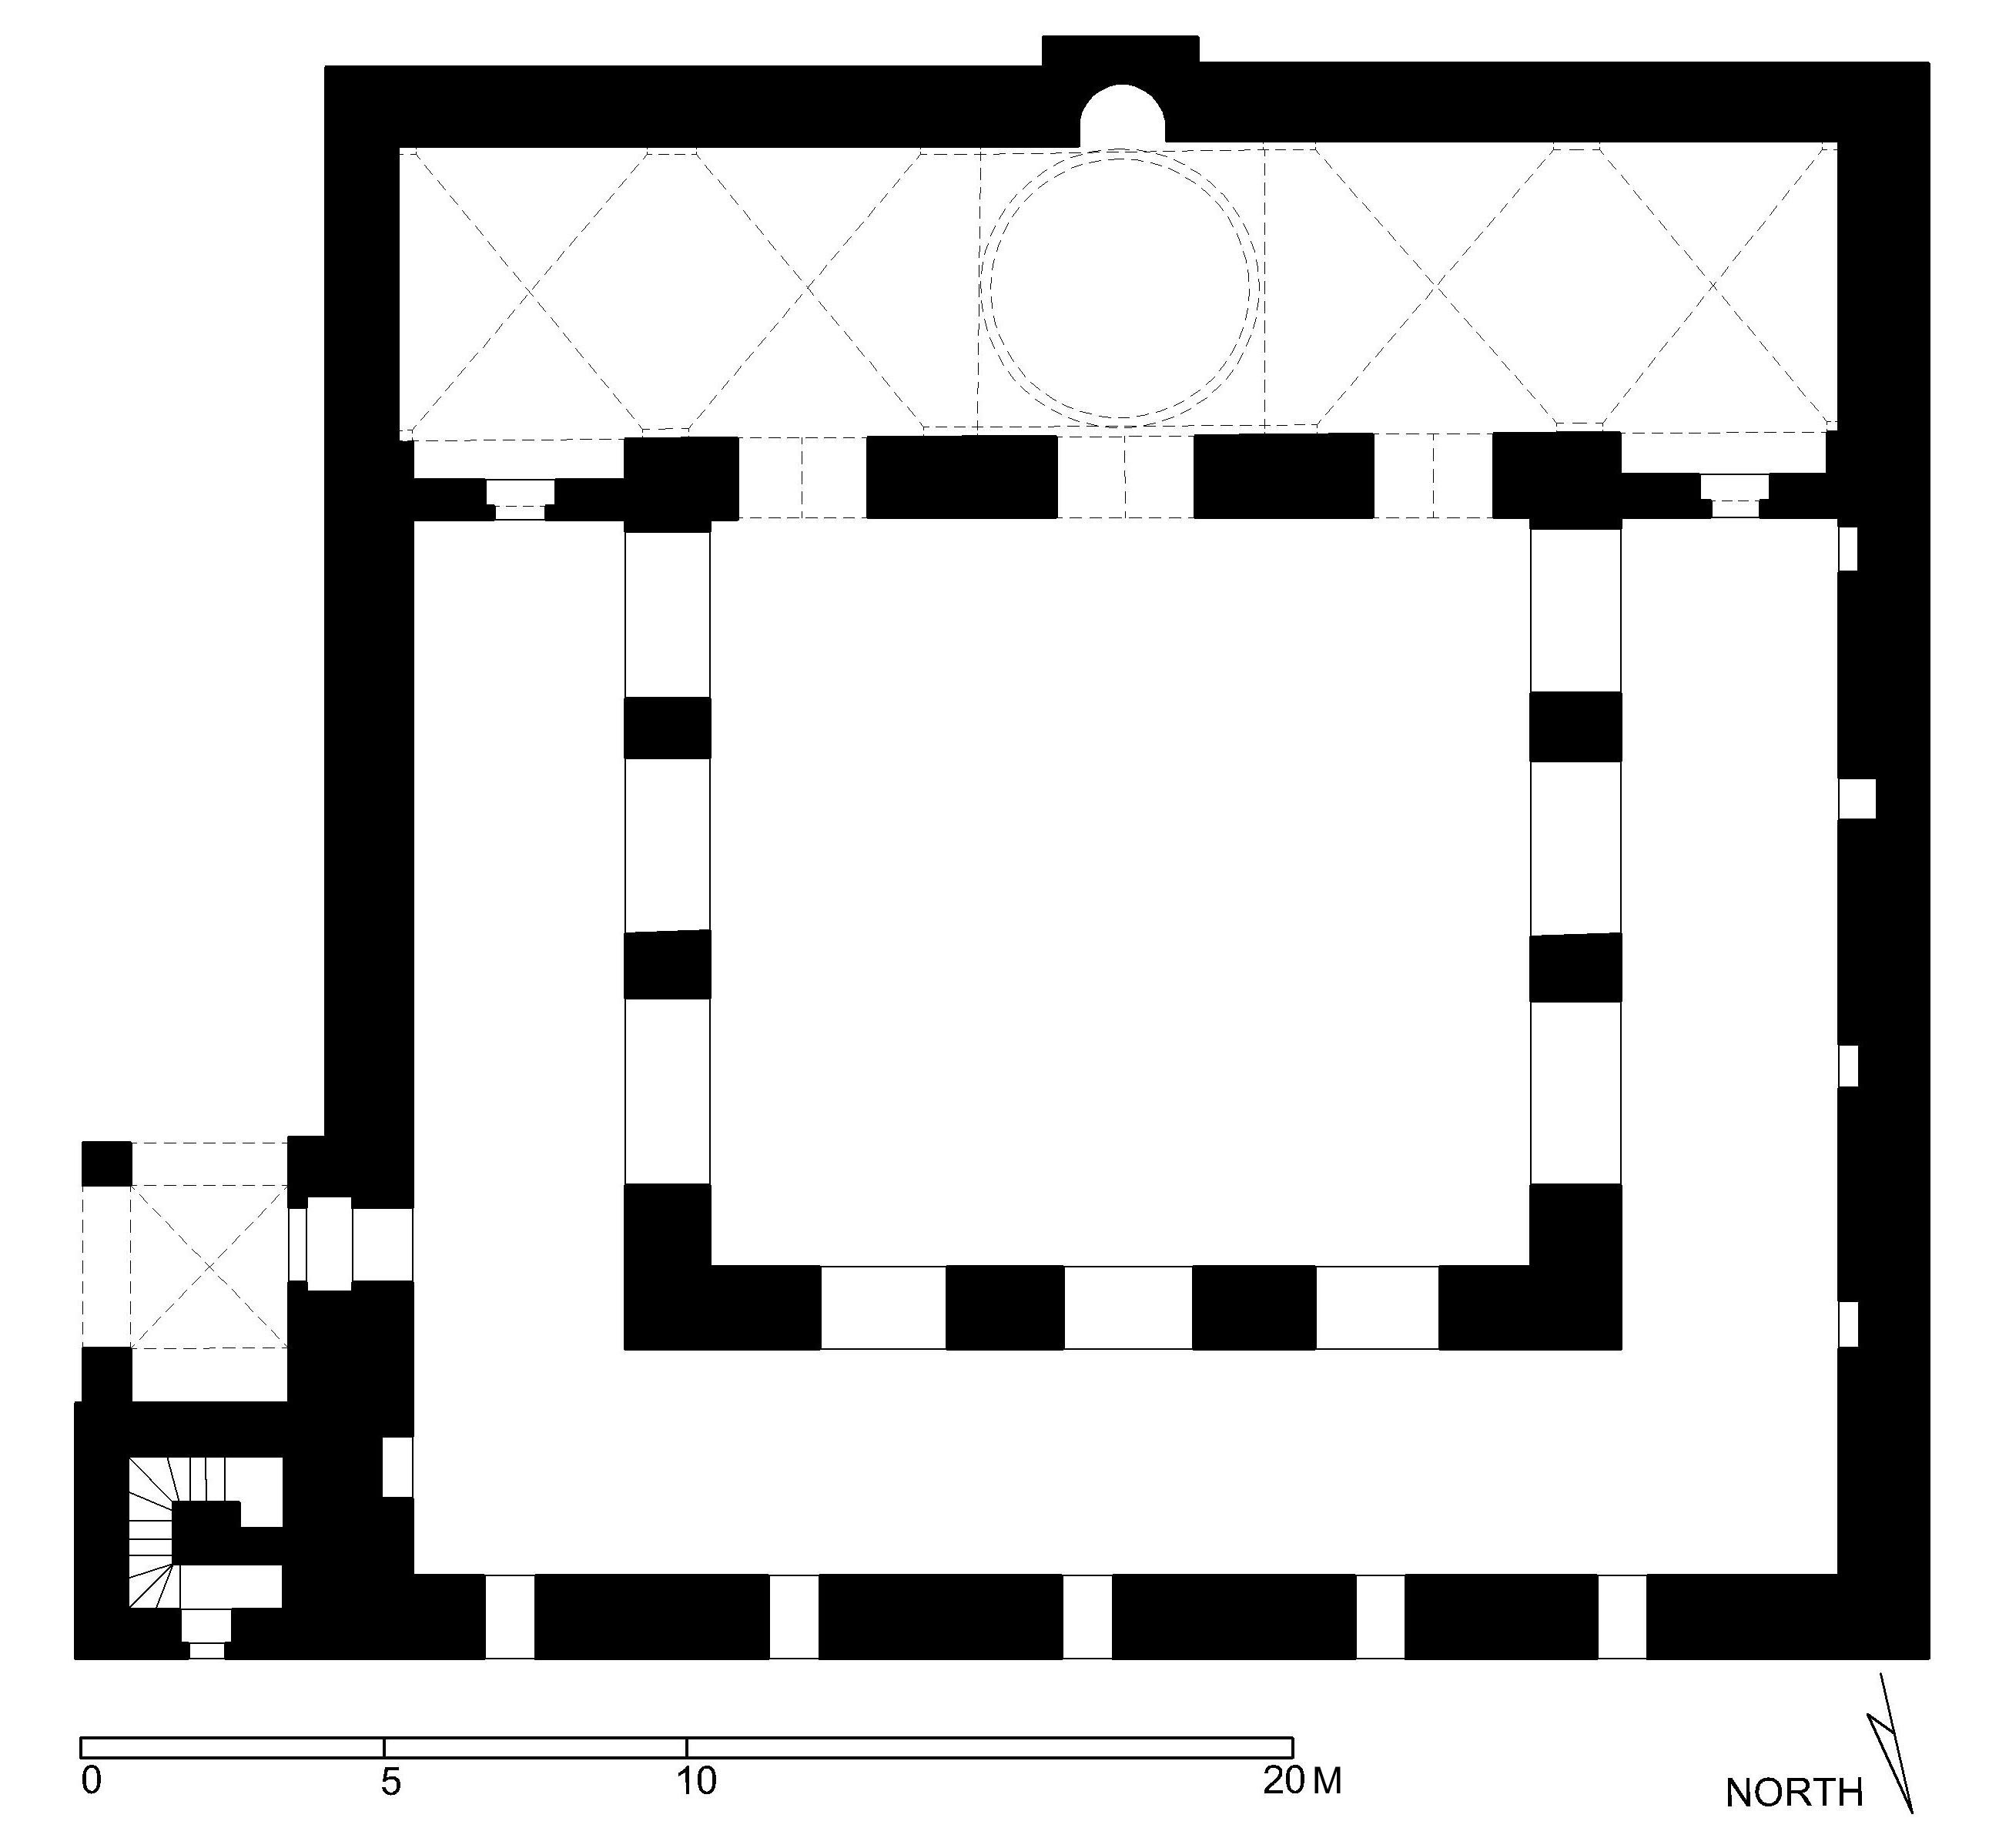 Floor plan of Great Mosque at the Citadel, Aleppo